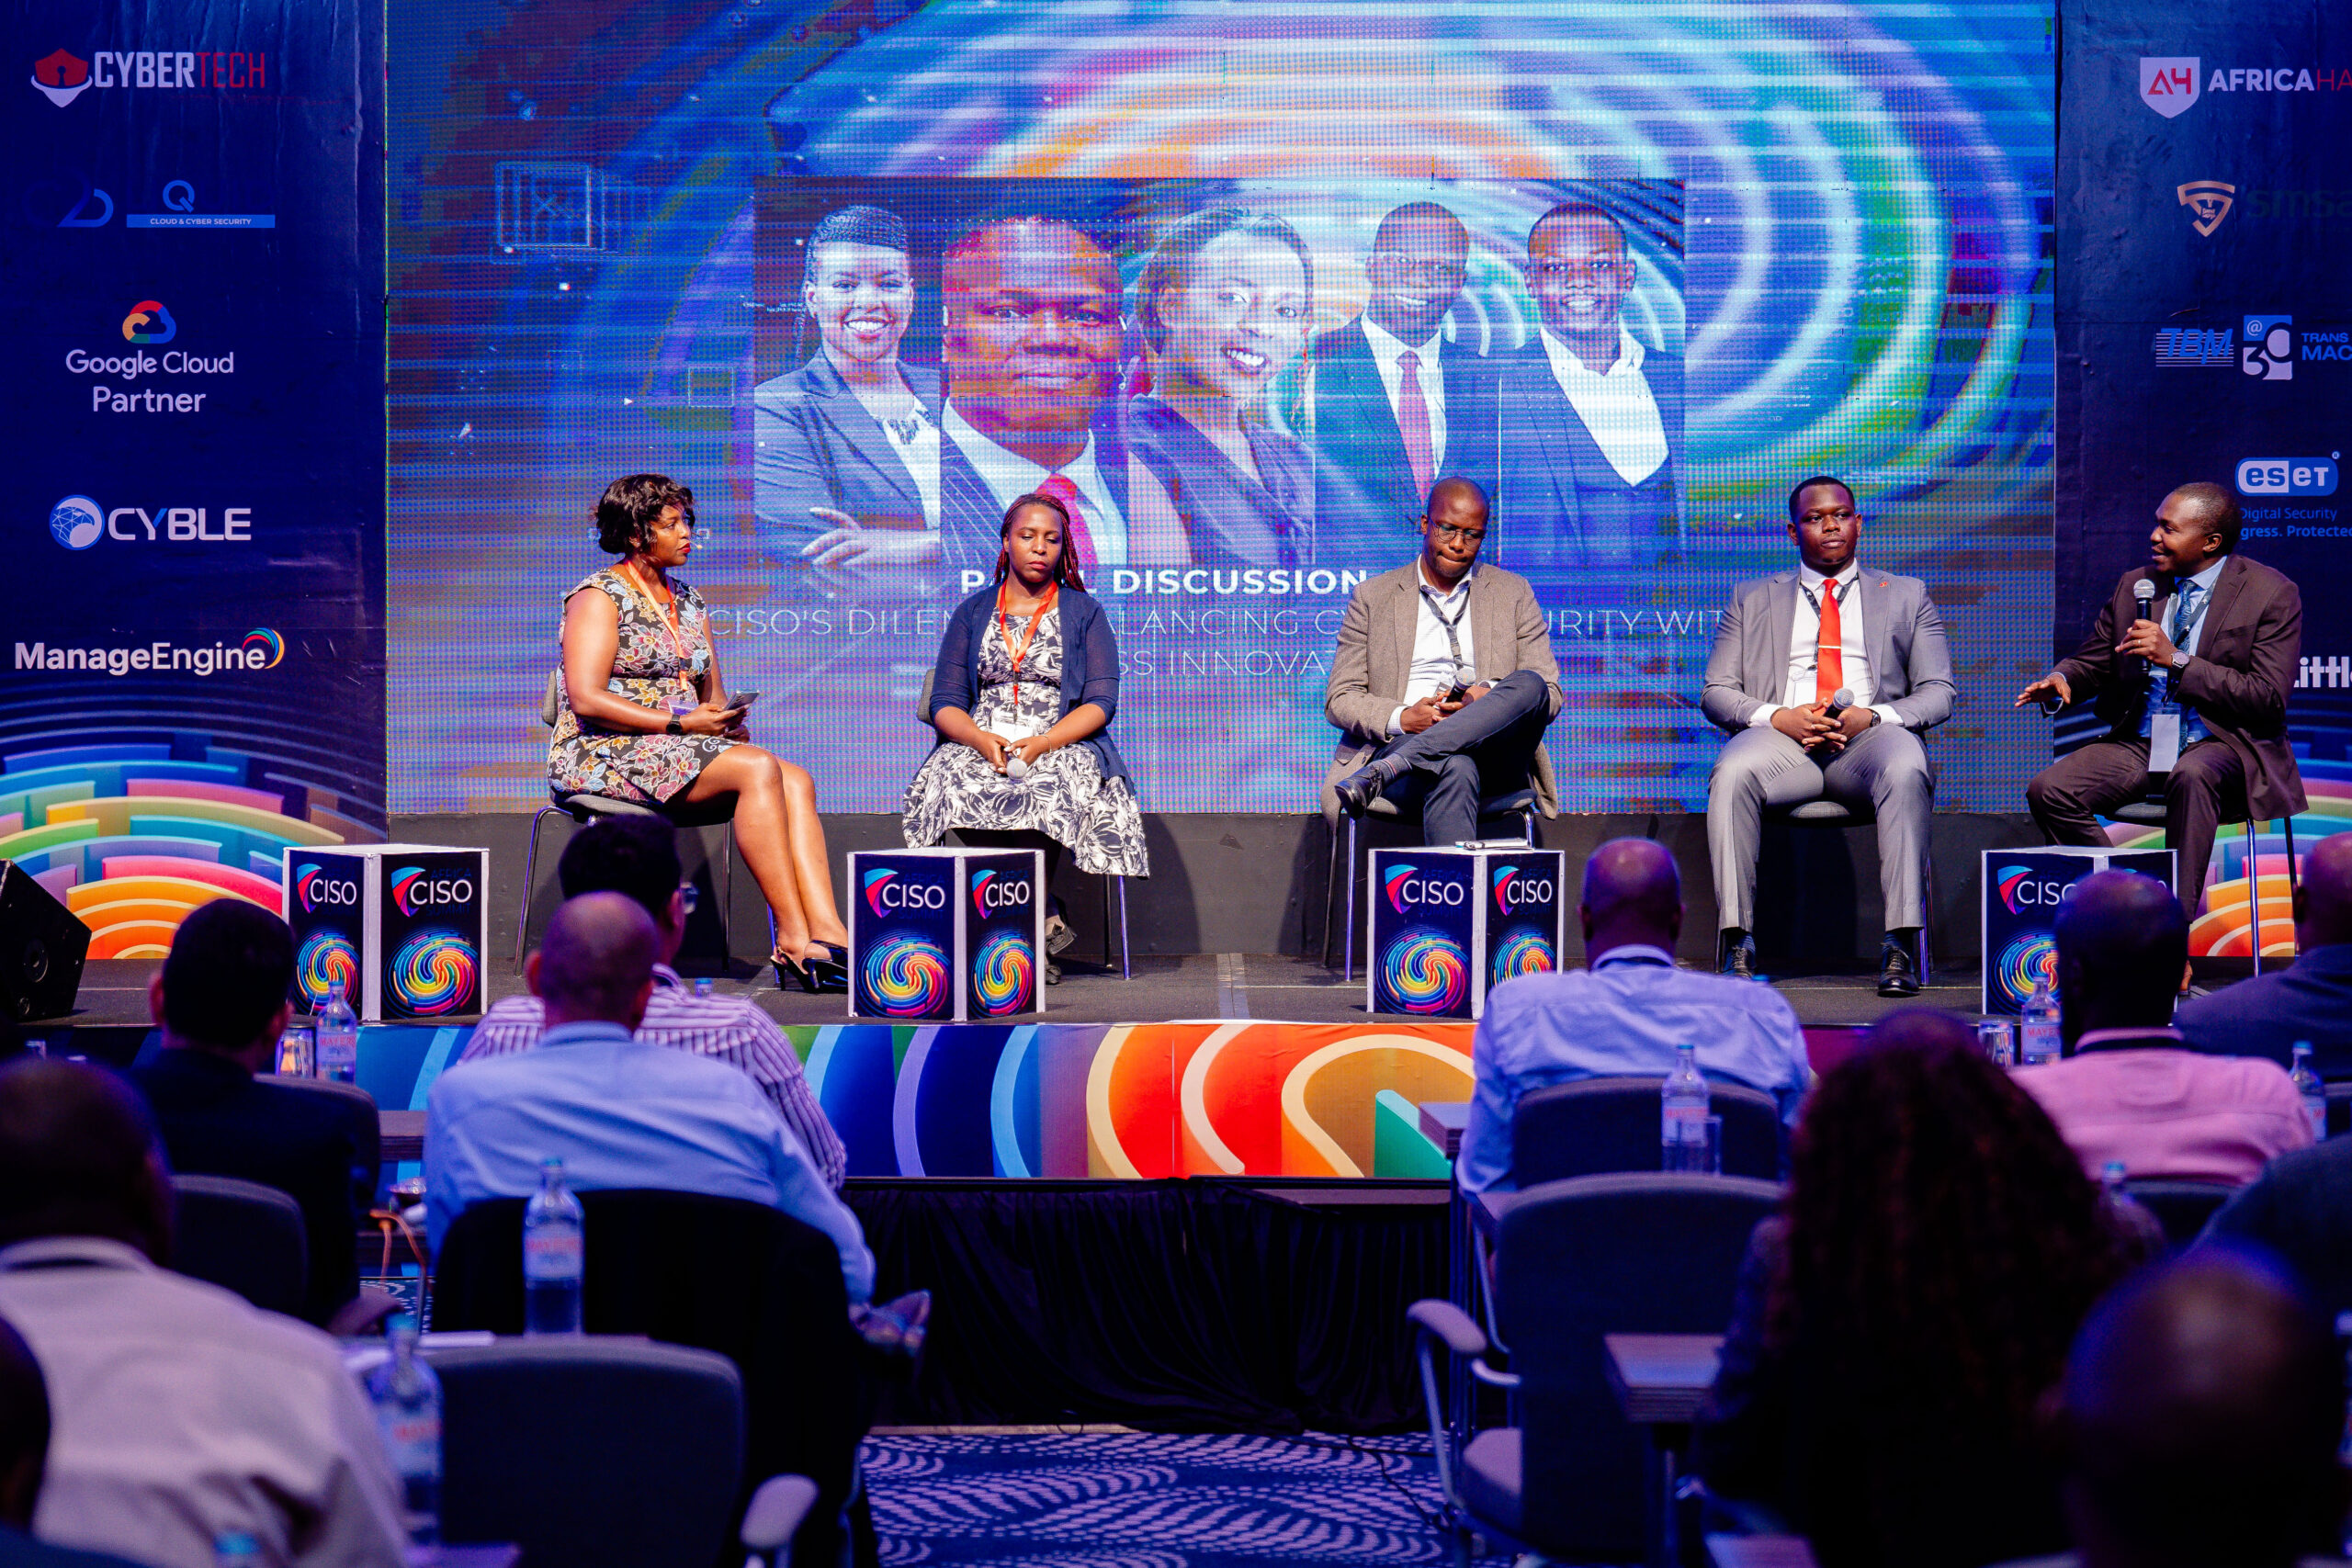 L-R: Michelle Kuria, Aprielle Oichoe, William Makatiani, and Shalom Onyibe at the Africa CISO Summit